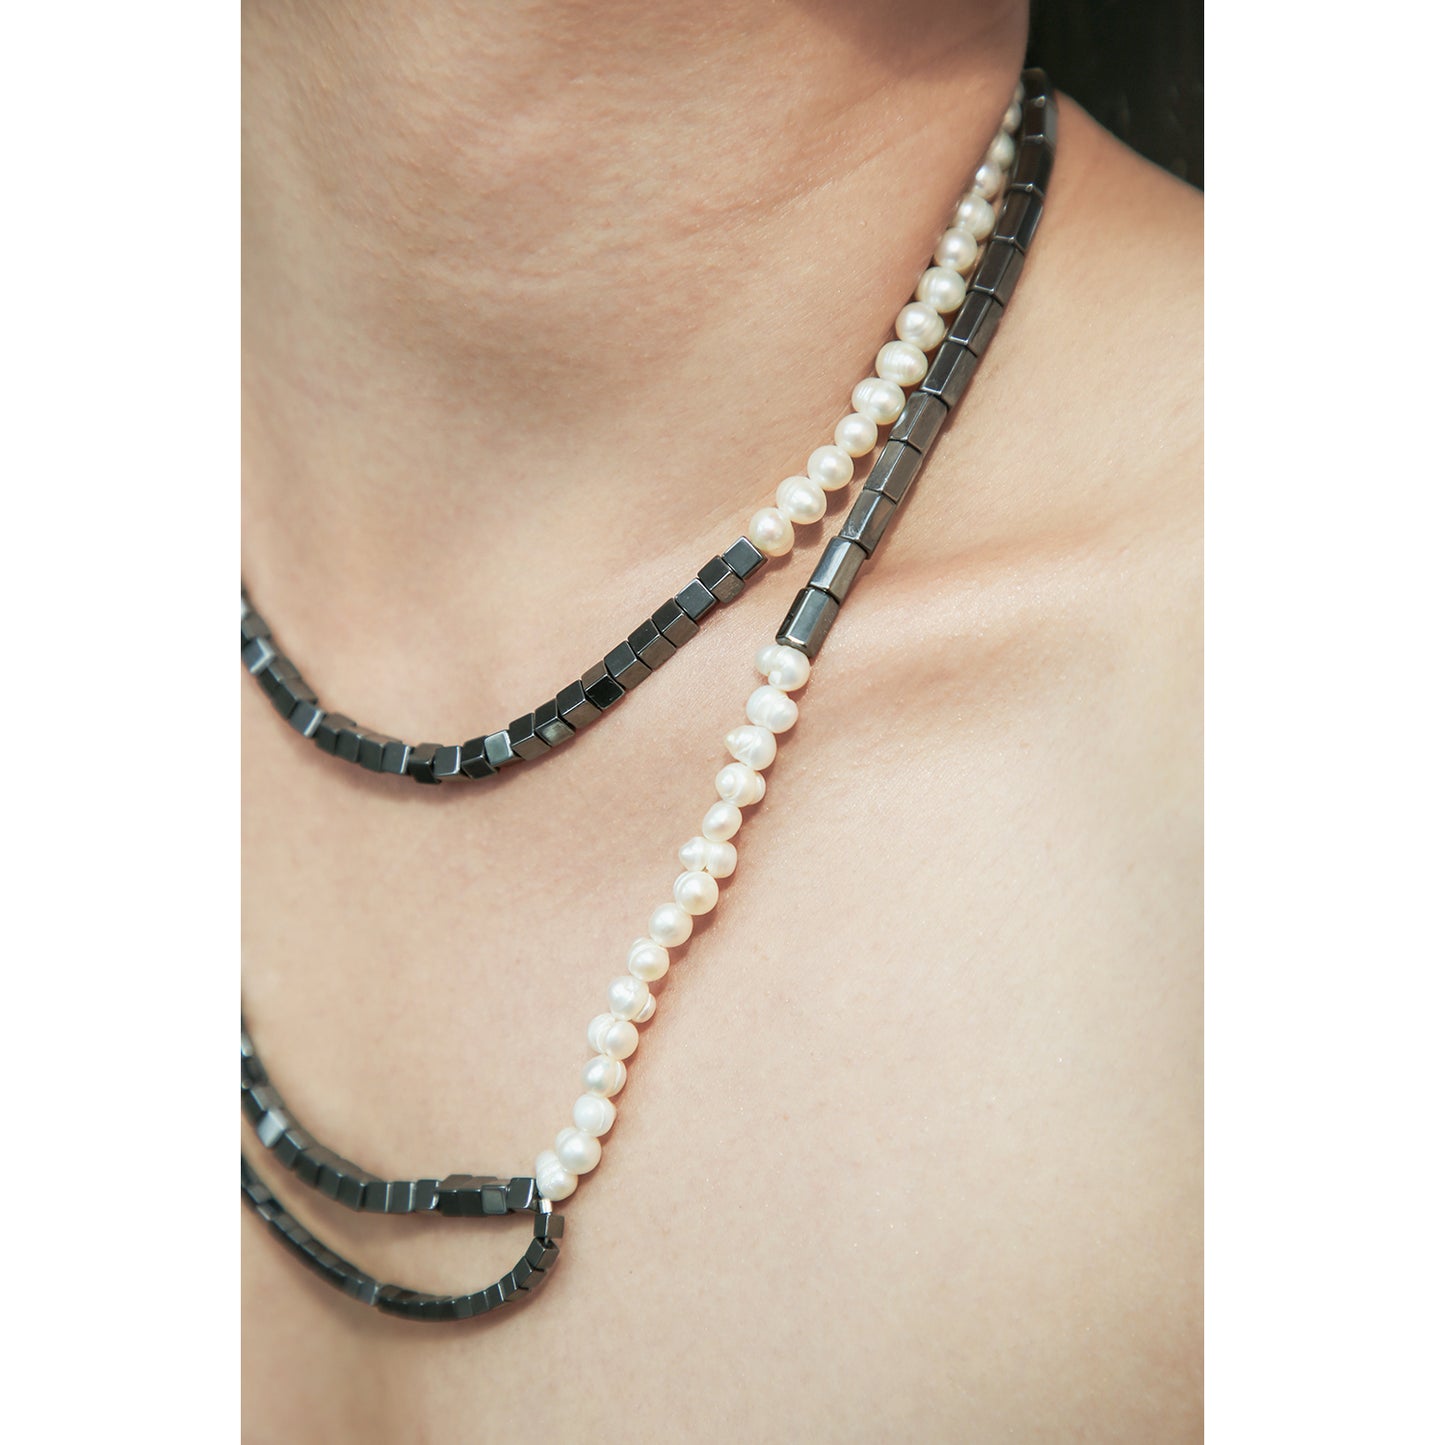 Long Loop Necklace with Freshwater Pearls and Hematine